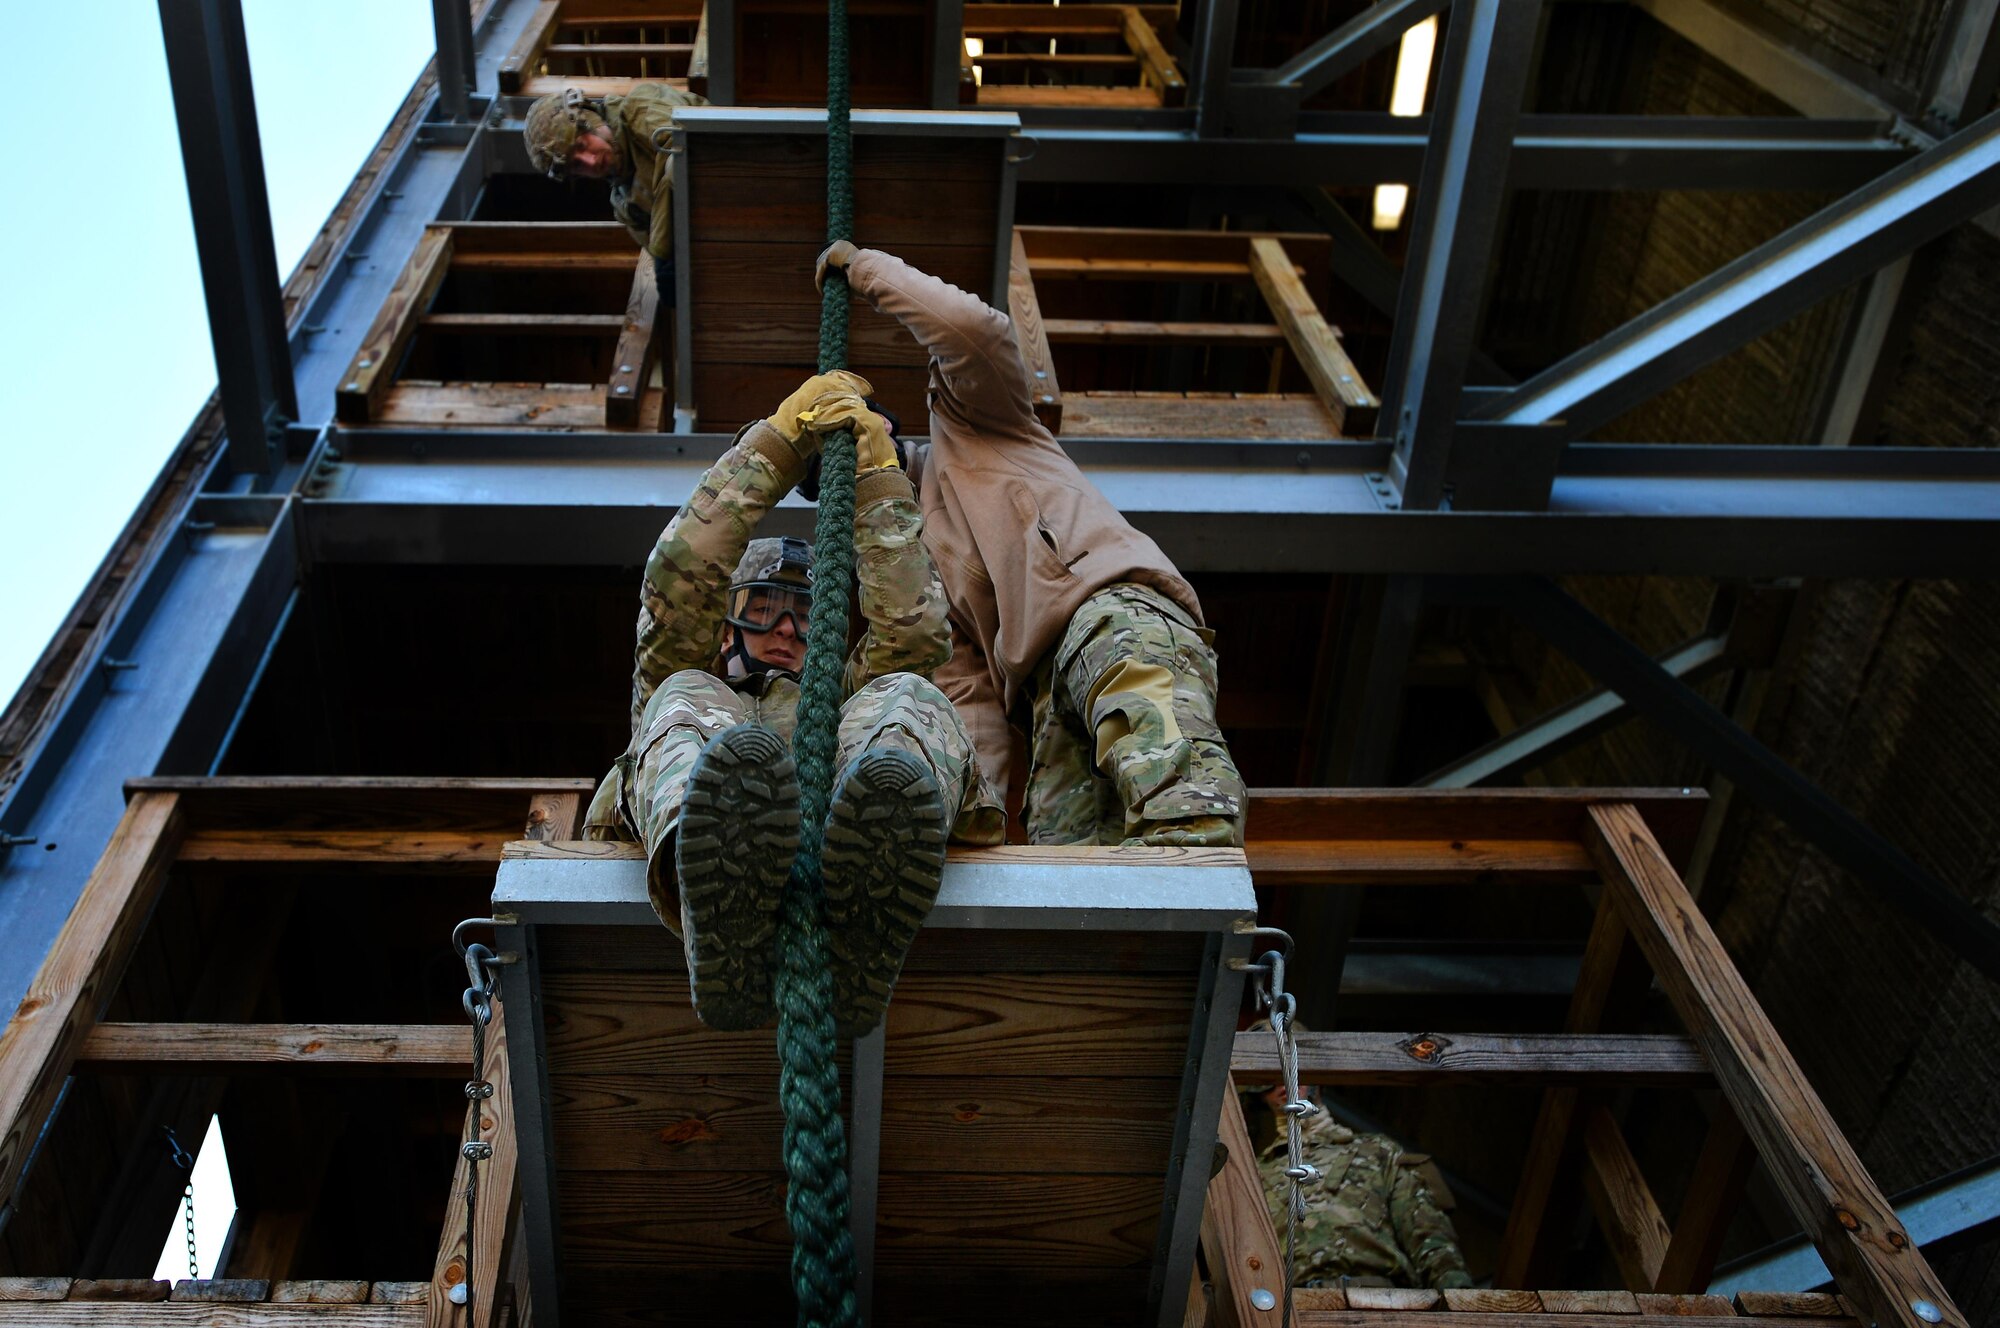 A U.S. Air Force Combat Control trainee assigned to Operating Location C, 342nd Training Squadron, works with instructors as he readies himself to fast-rope from a training tower, Feb. 13, 2015 at Pope Army Airfield, North Carolina. Fast-roping is a technique often used by Combat Control Airmen and other military members when descending a thick rope. It is useful for deploying troops from a helicopter in places where the helicopter itself cannot touch down. (U.S. Air Force photo by Staff Sgt. Kenny Holston)